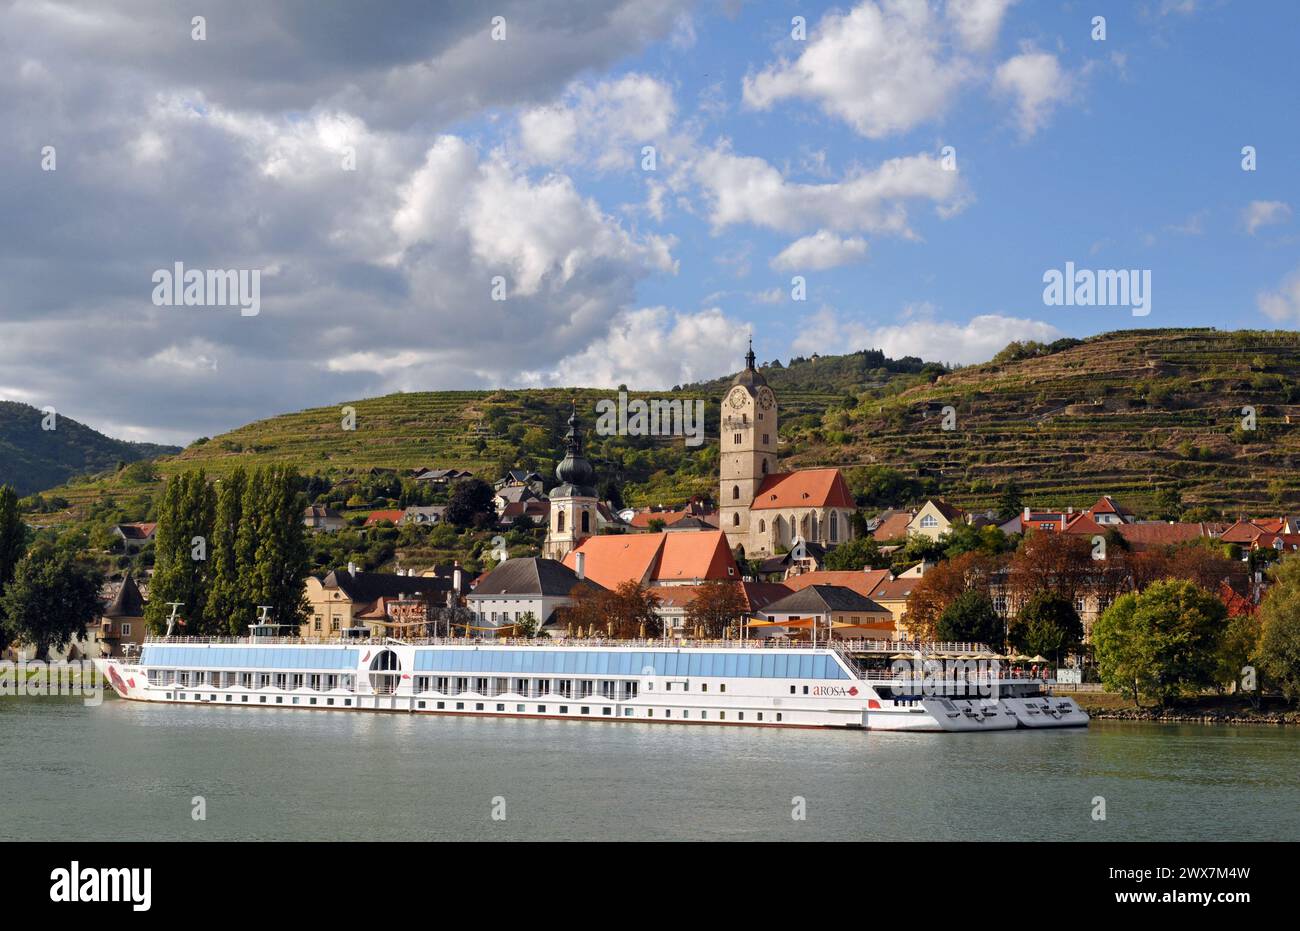 Danube River cruise ships docked at the historic city of Krems in Lower Austria's scenic Wachau Valley. Stock Photo